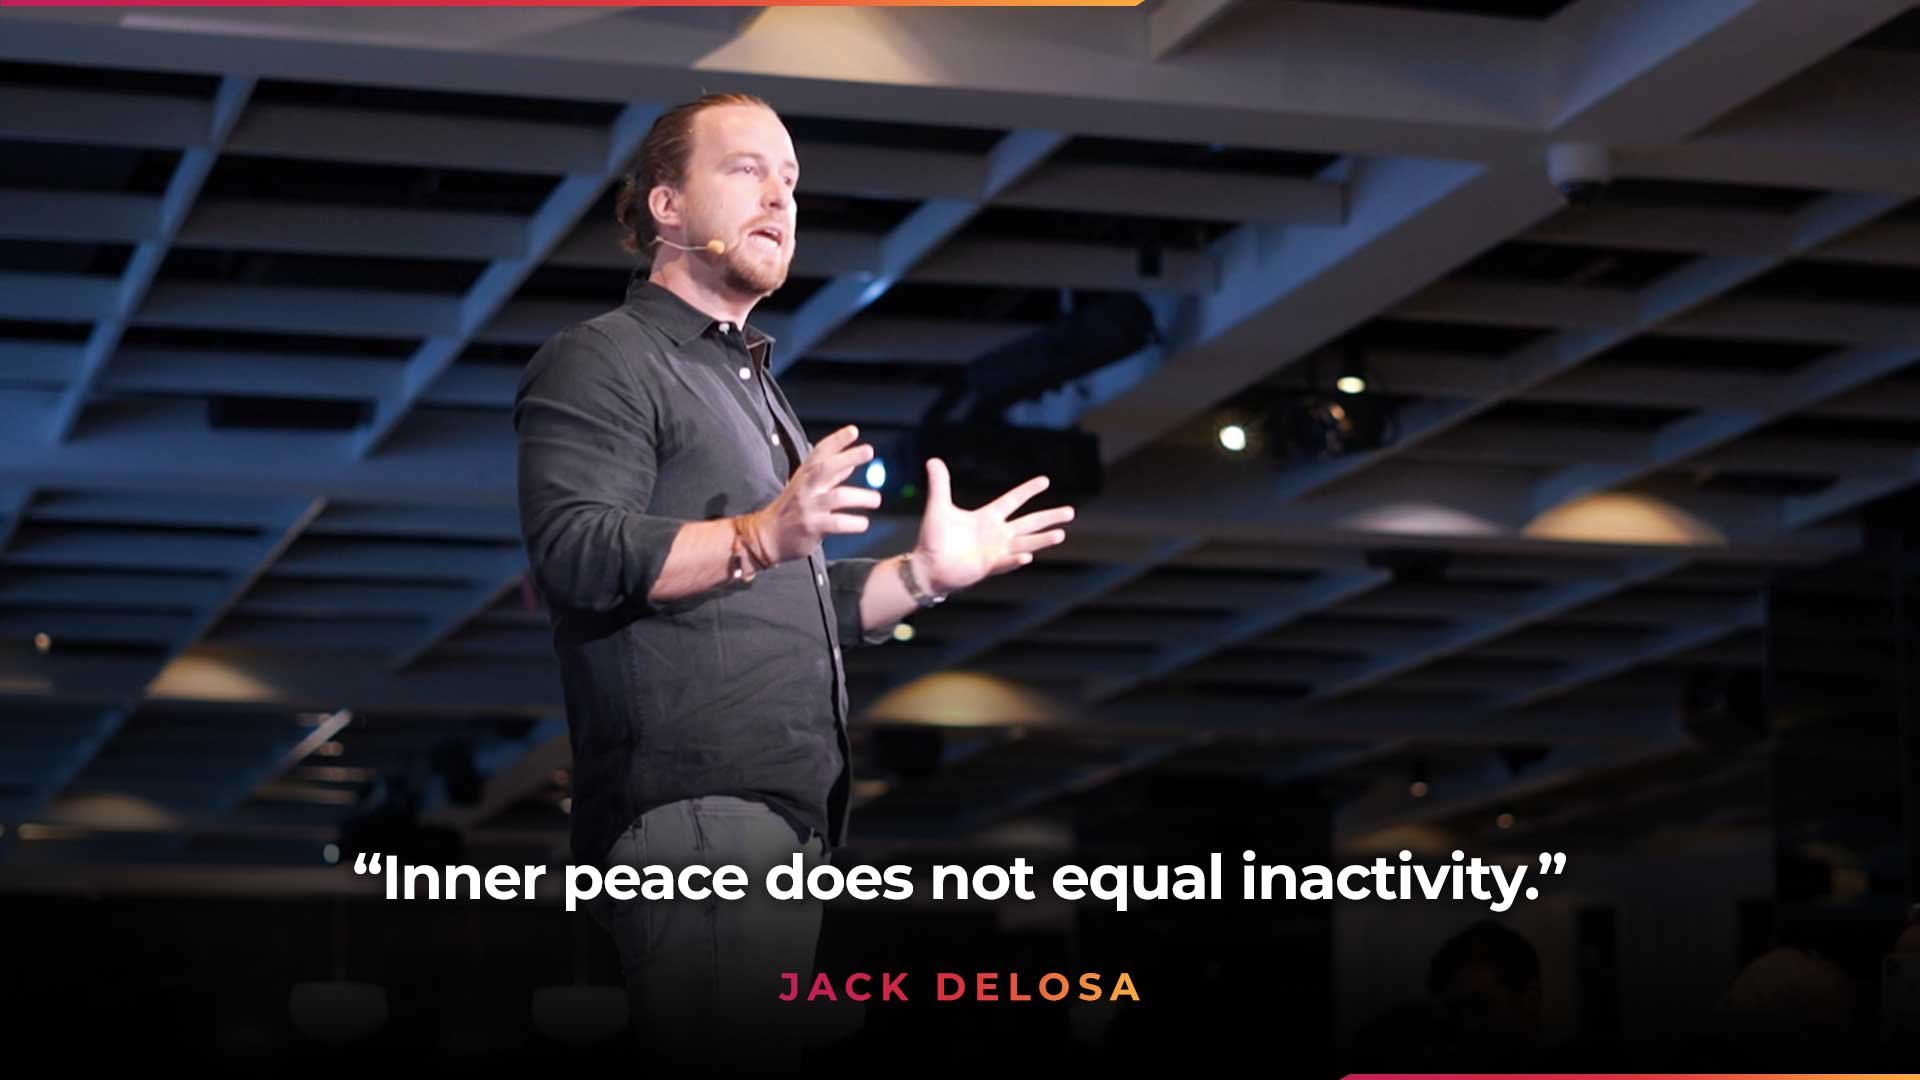 Jack Delosa, Founder of The Entourage quote - Inner peace does not equal inactivity.